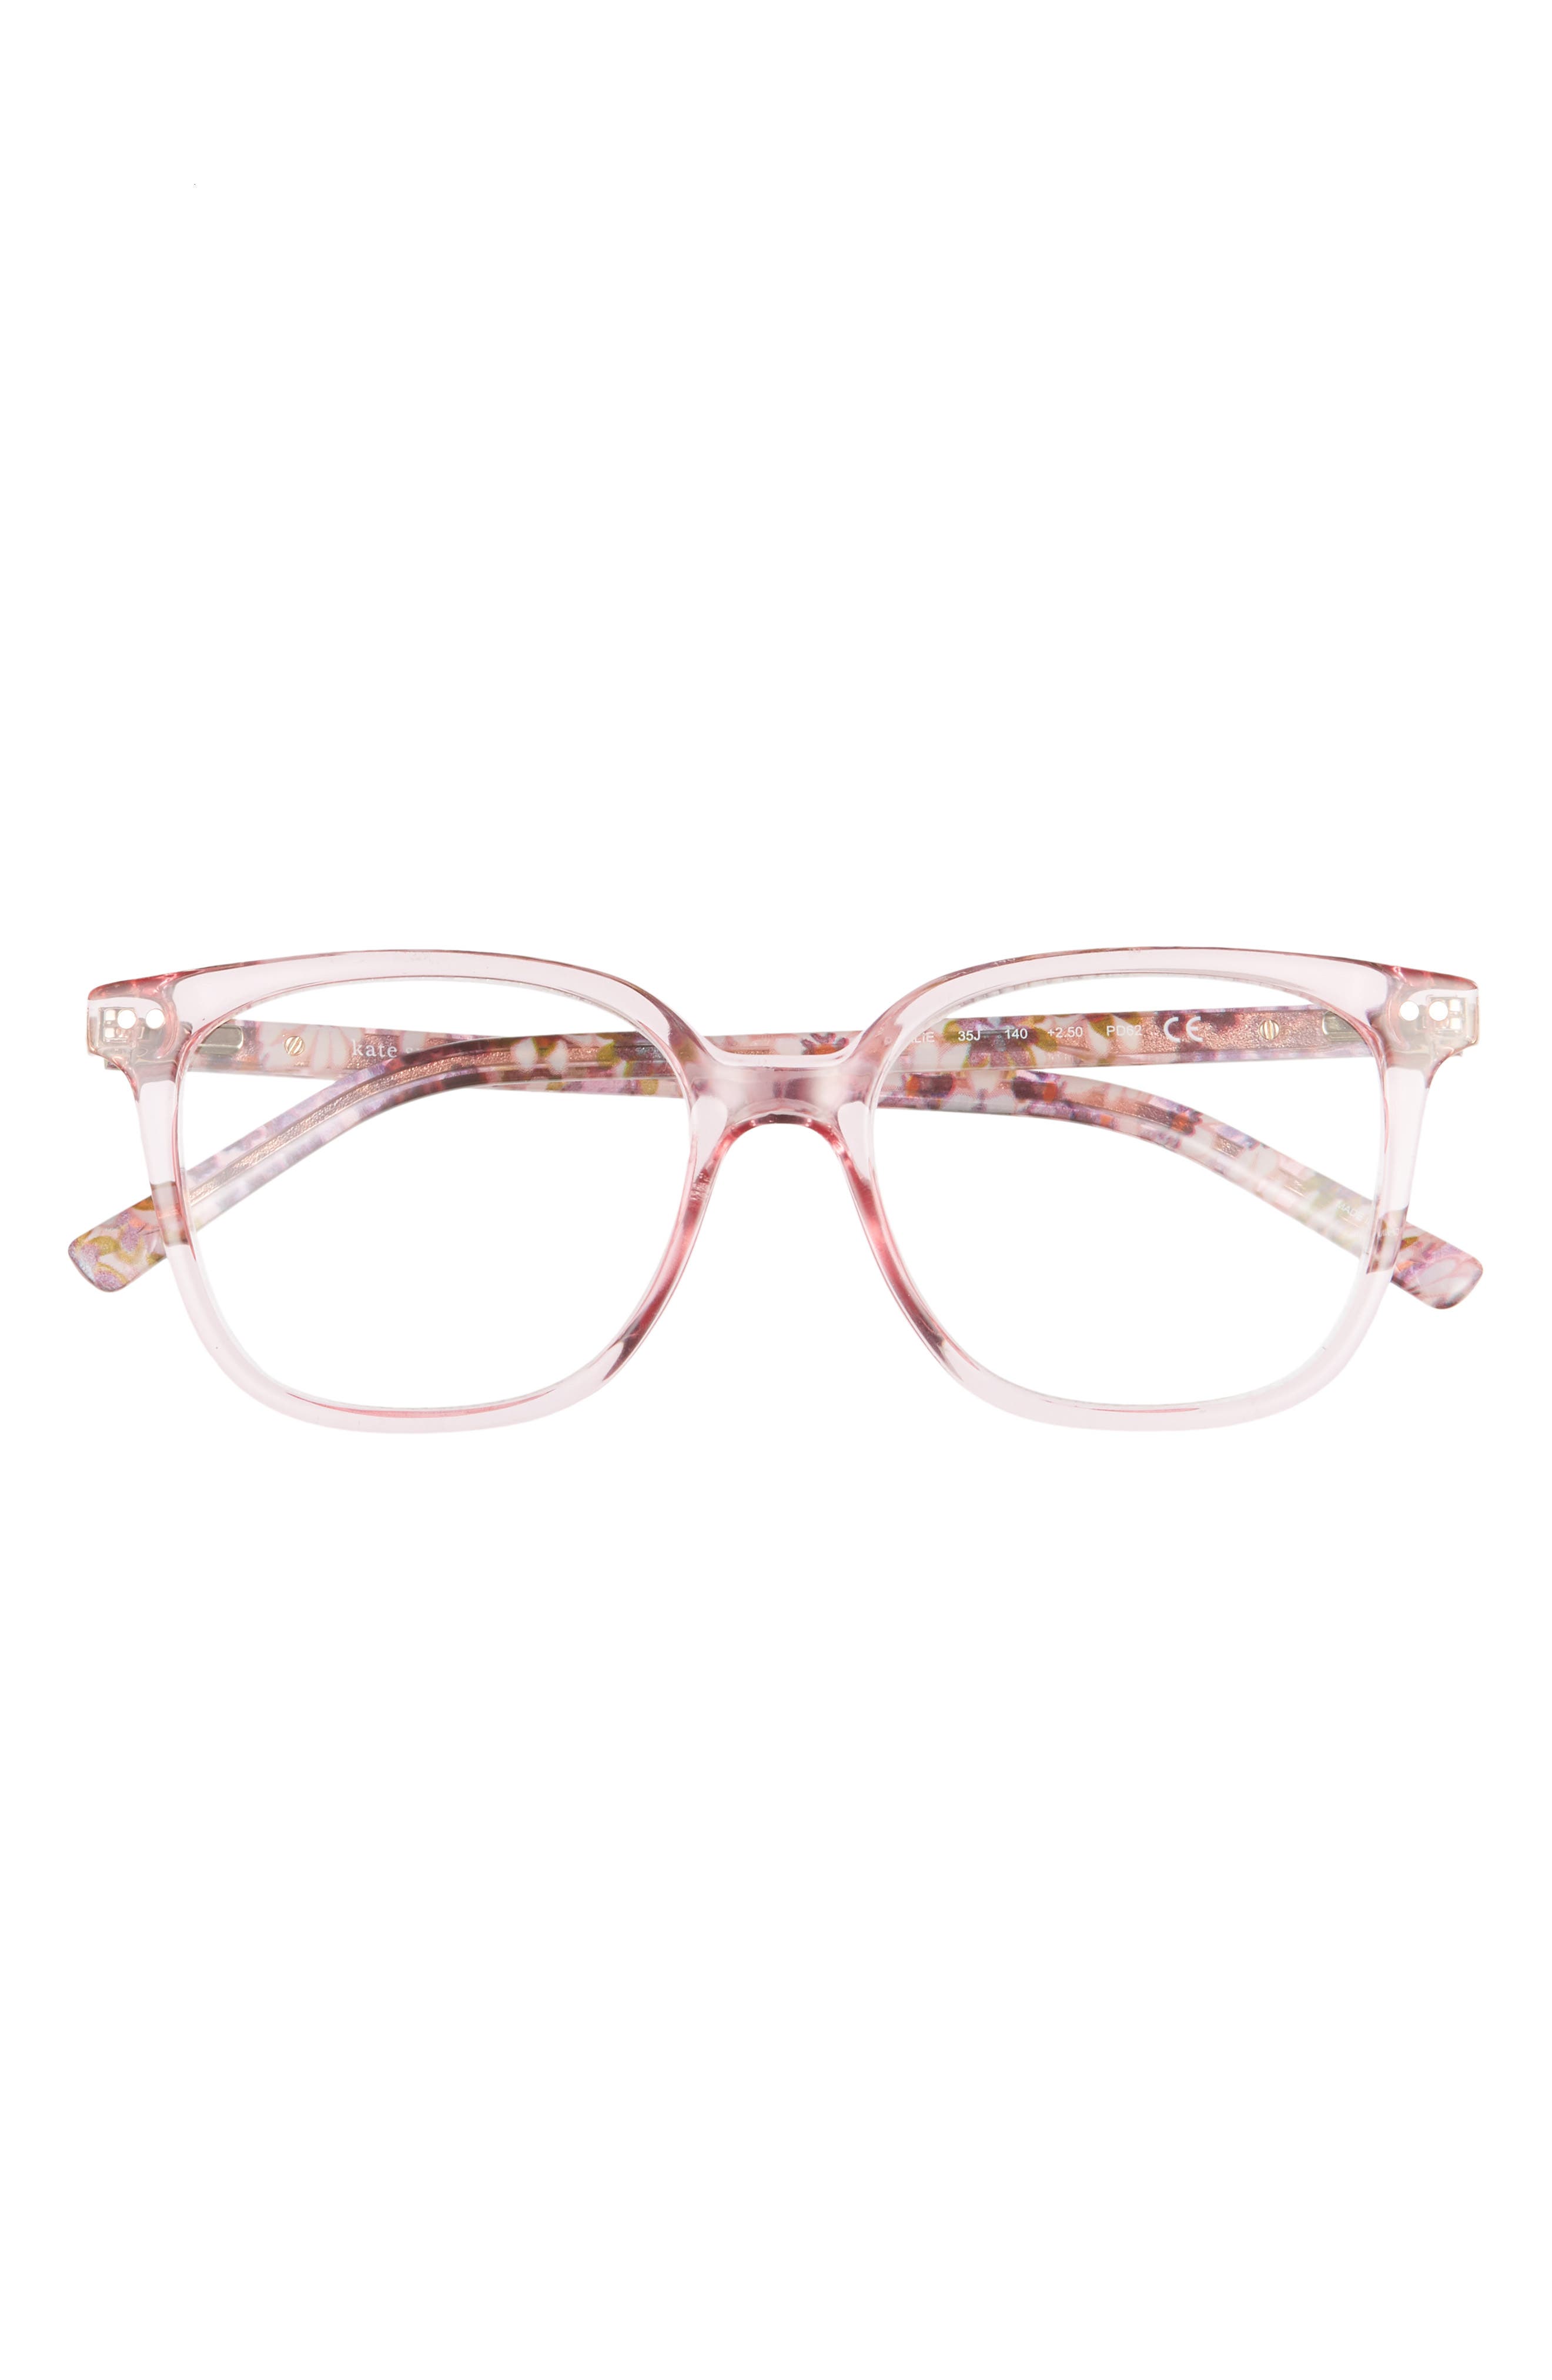 KATE SPADE NEW YORK Tinlee 52MM Reading Glasses HAVANA 2.5 with